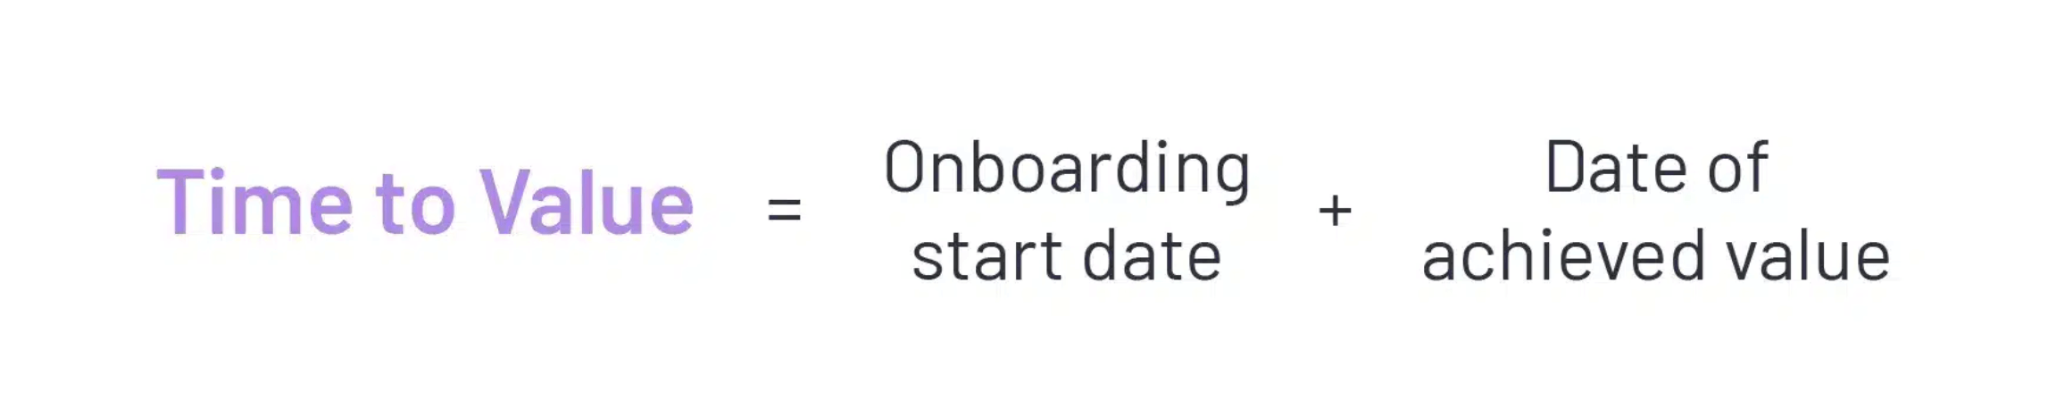 Time to value equals the onboarding start data, plus the date of achieved value